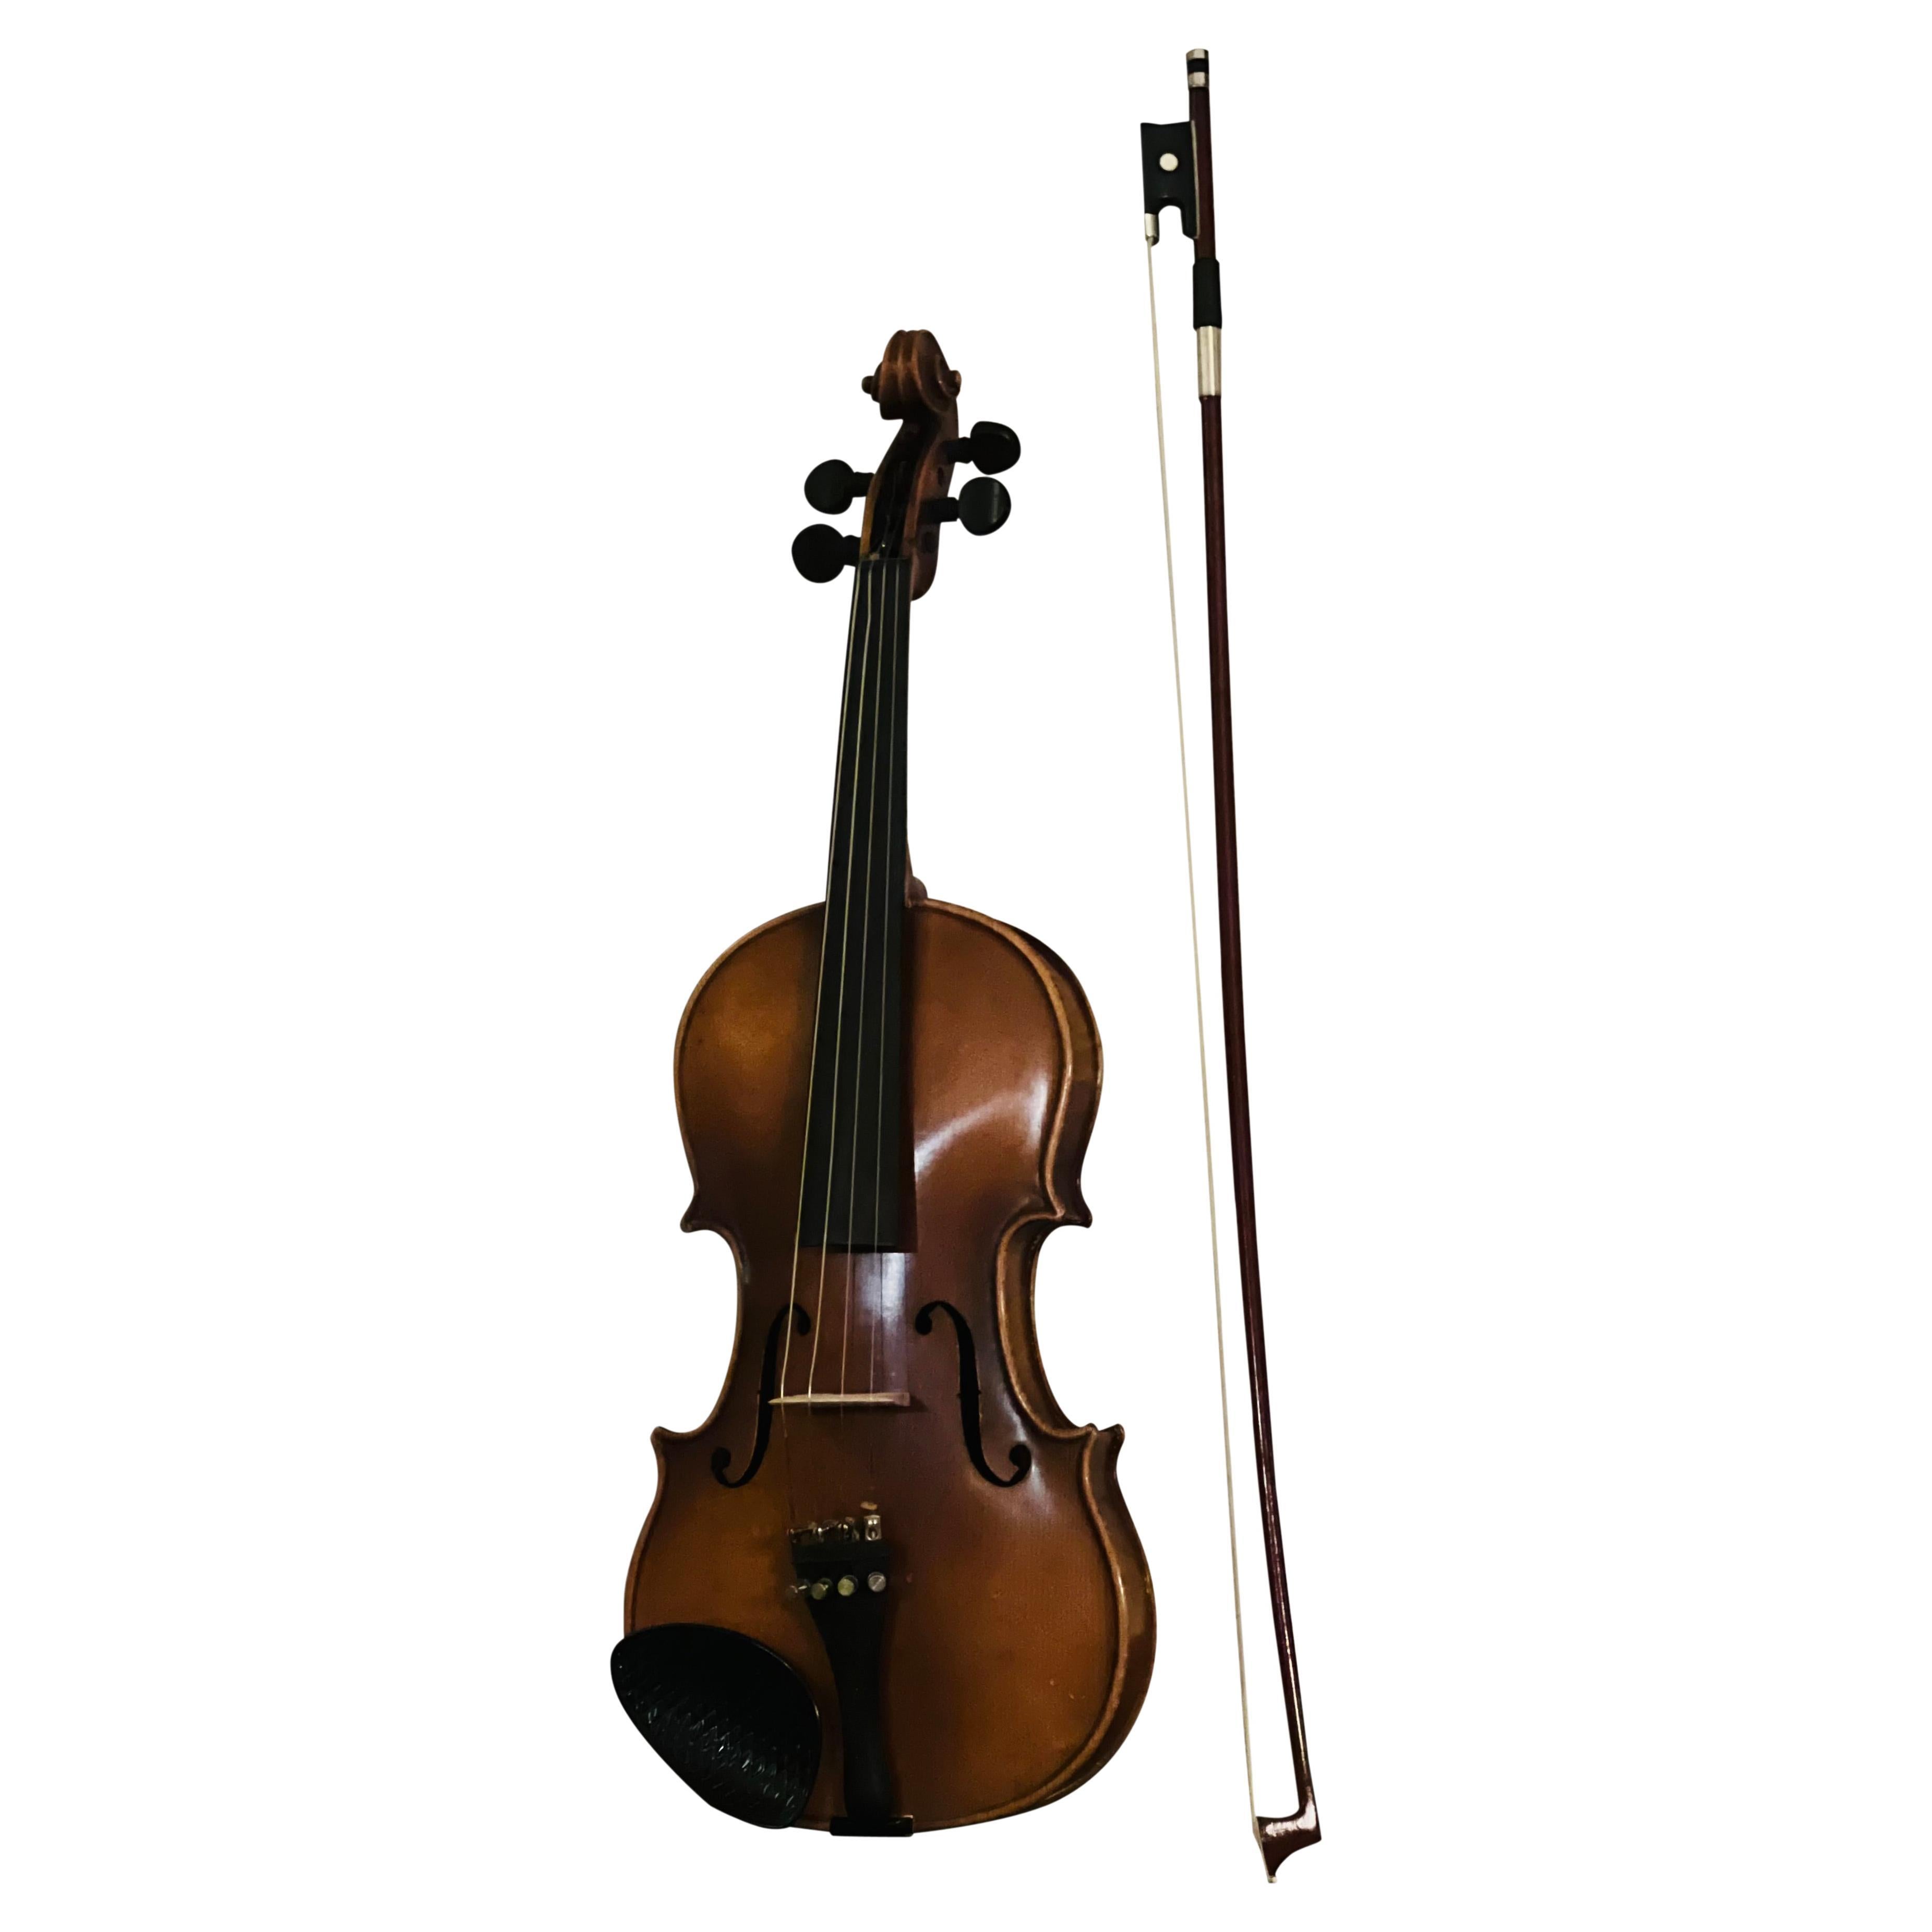 1970 3/4 E.R. Pfretzschner Hand-Crafted Violin in the Style of A. Stradivarius im Angebot